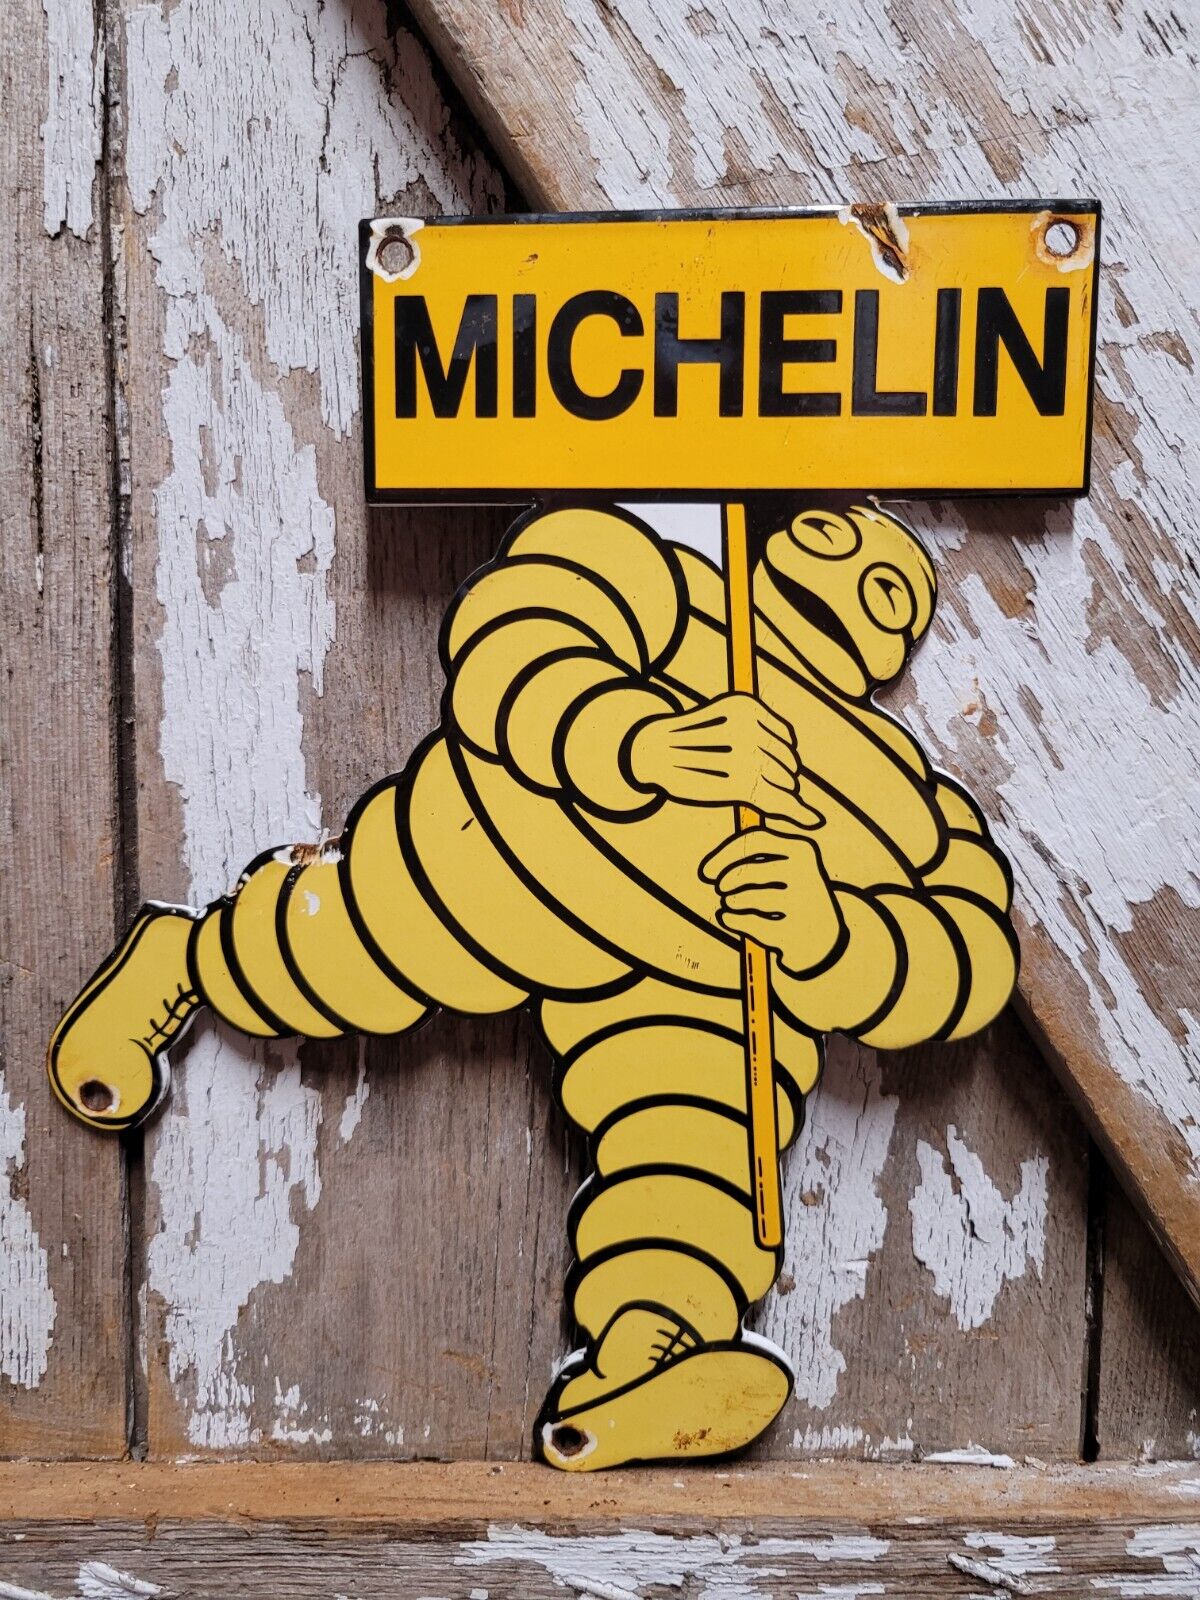 VINTAGE MICHELIN MAN PORCELAIN SIGN TIRE AUTO PARTS SERVICE SUPPLY ADVERTISING